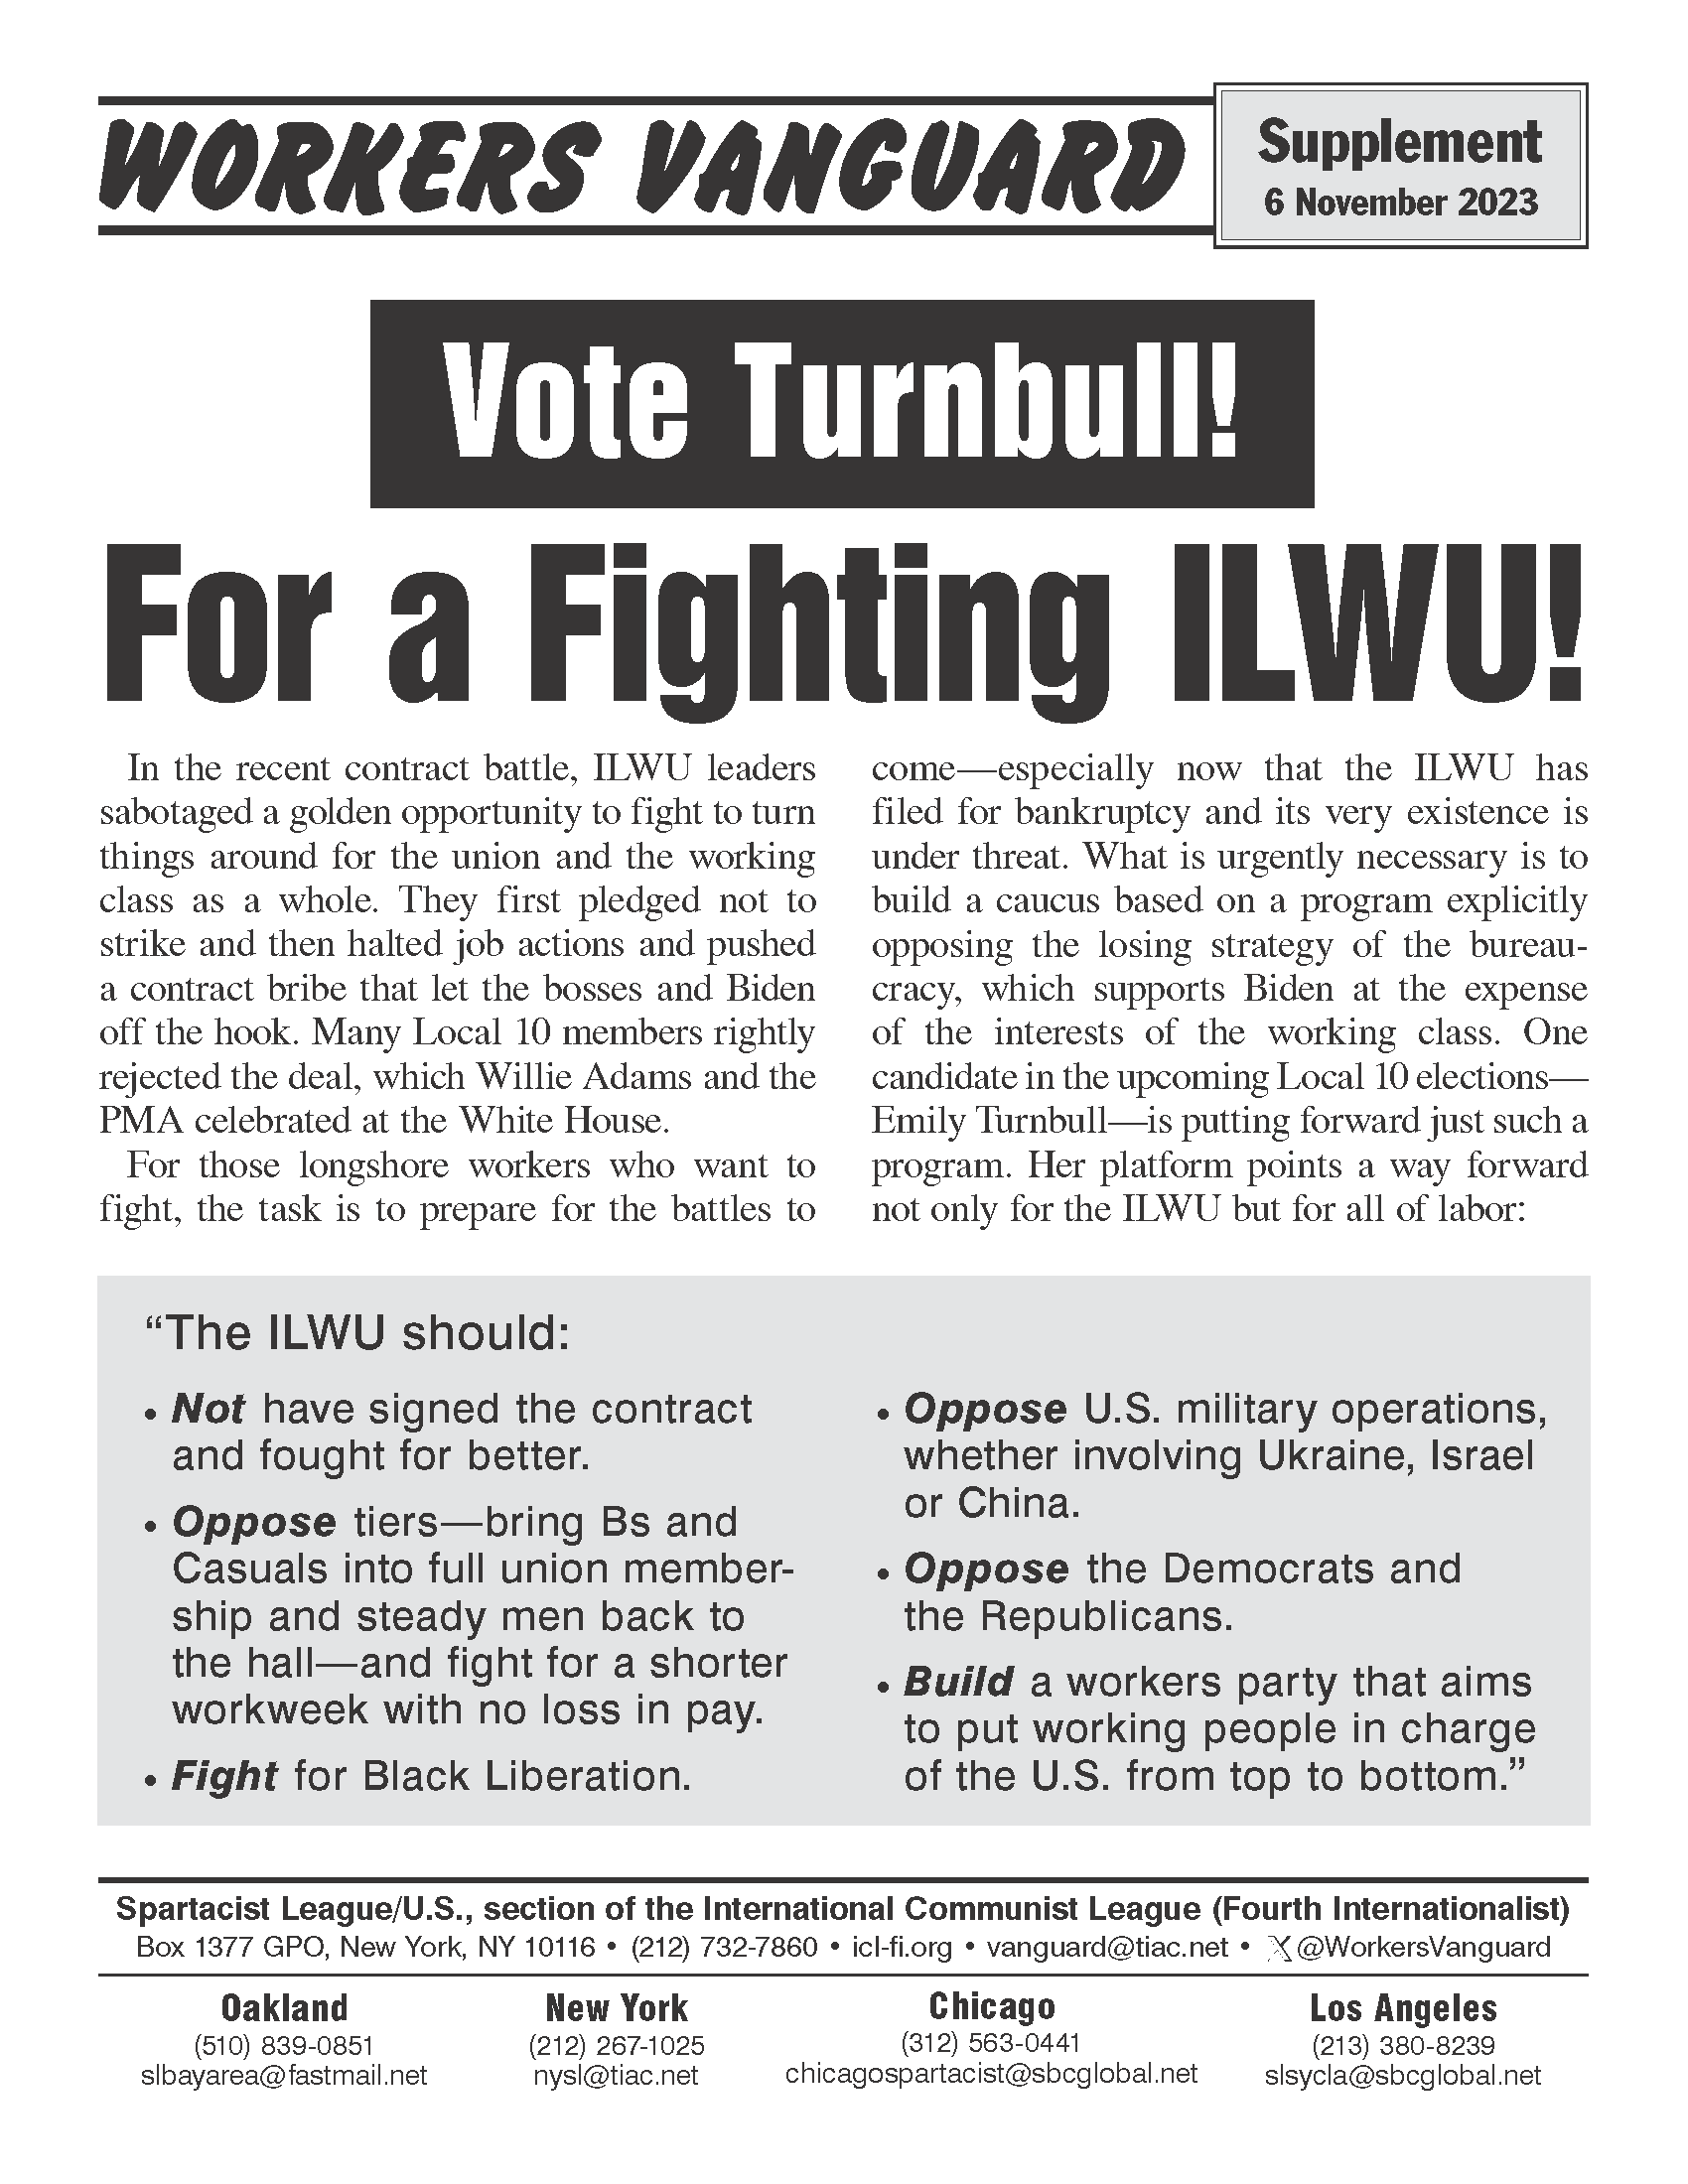 For a Fighting ILWU!